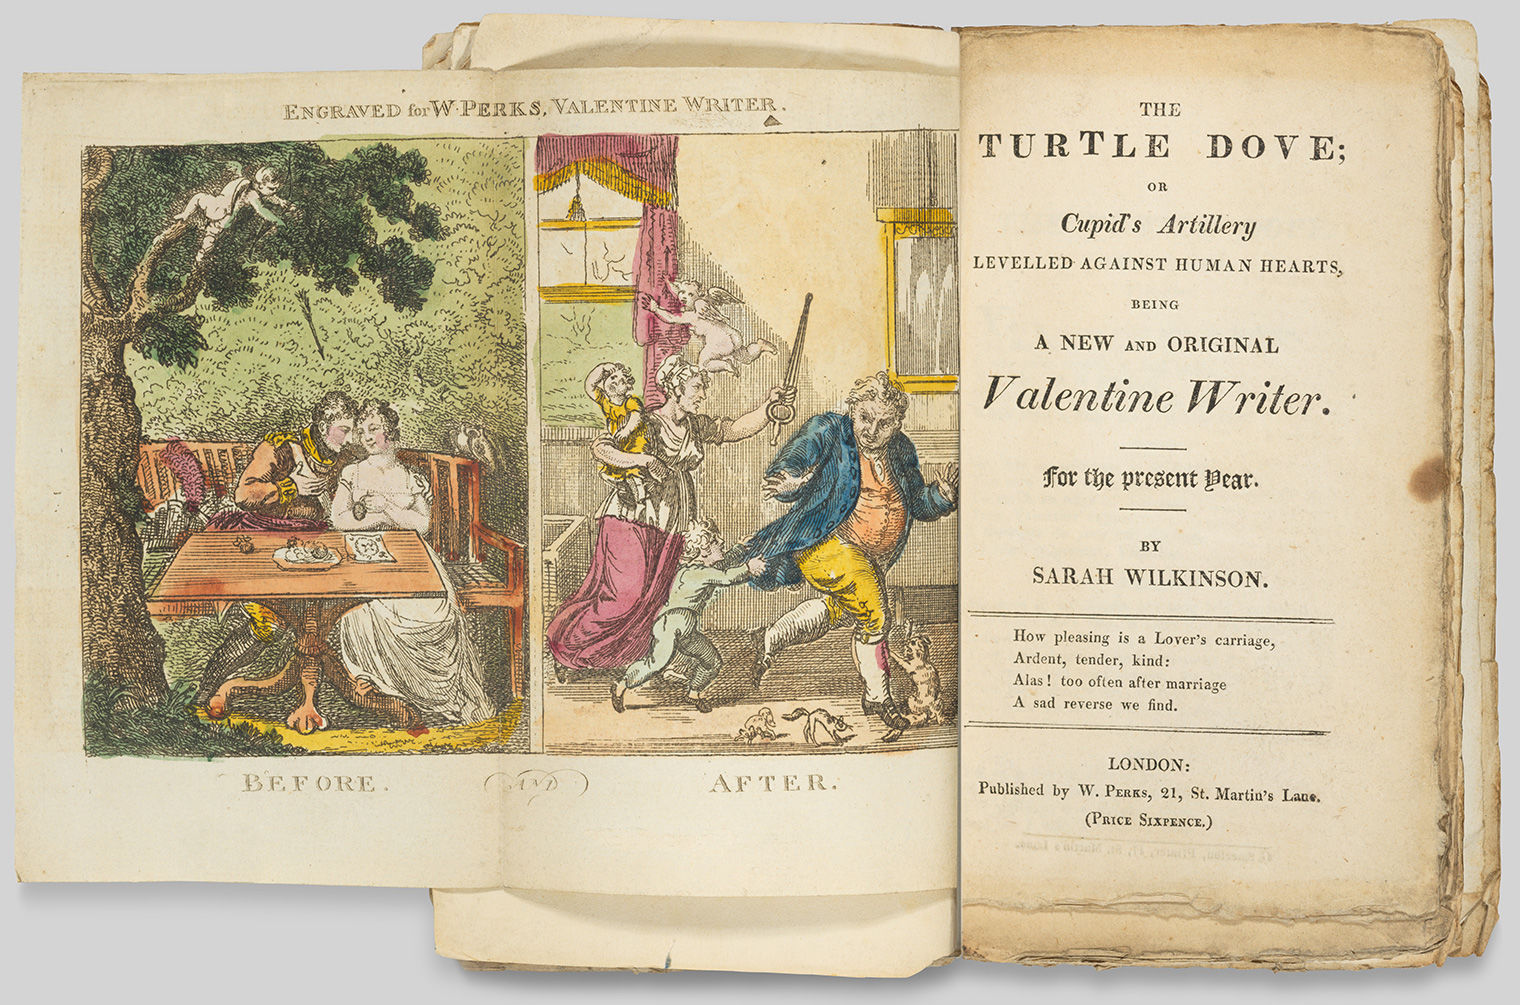 A book is opened to the frontispiece, with two before/after images, and title page. The left panel of the frontispiece shows a happy young couple seated at a table in a garden, while the right panel shows the woman, baby in arms, chasing angrily after the man with children tugging at their feet. 